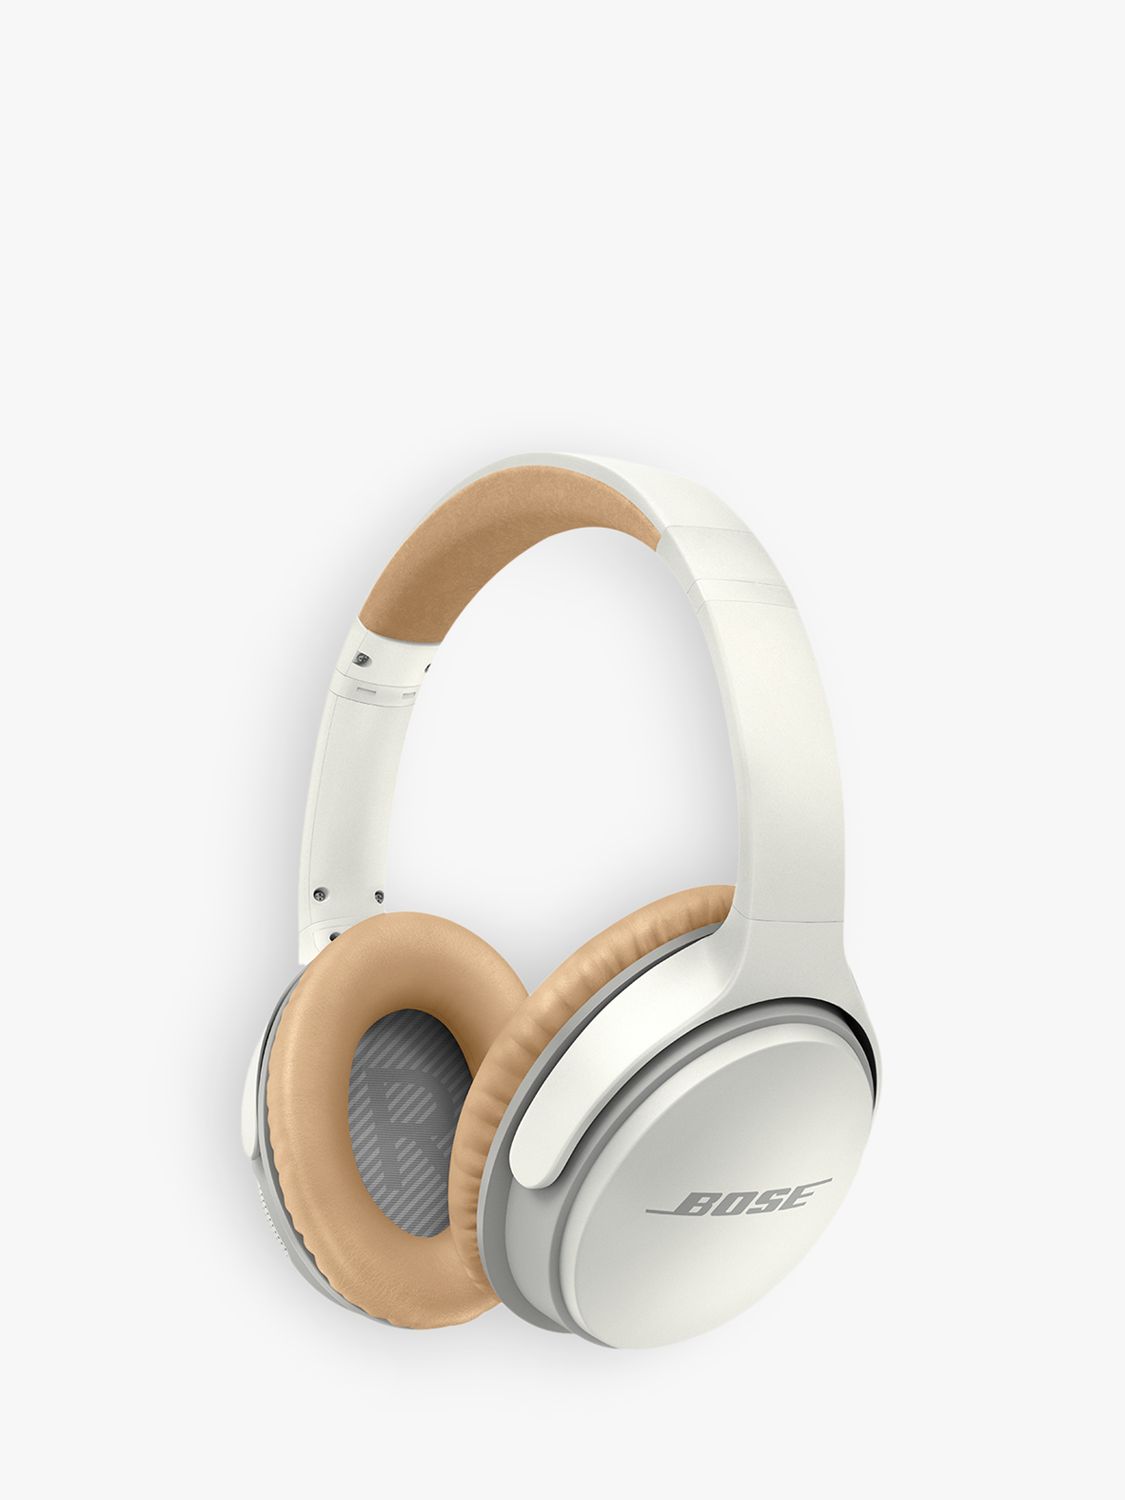 Bose Soundlink Ae2 Wireless Bluetooth Over Ear Headphones With Built In Microphone